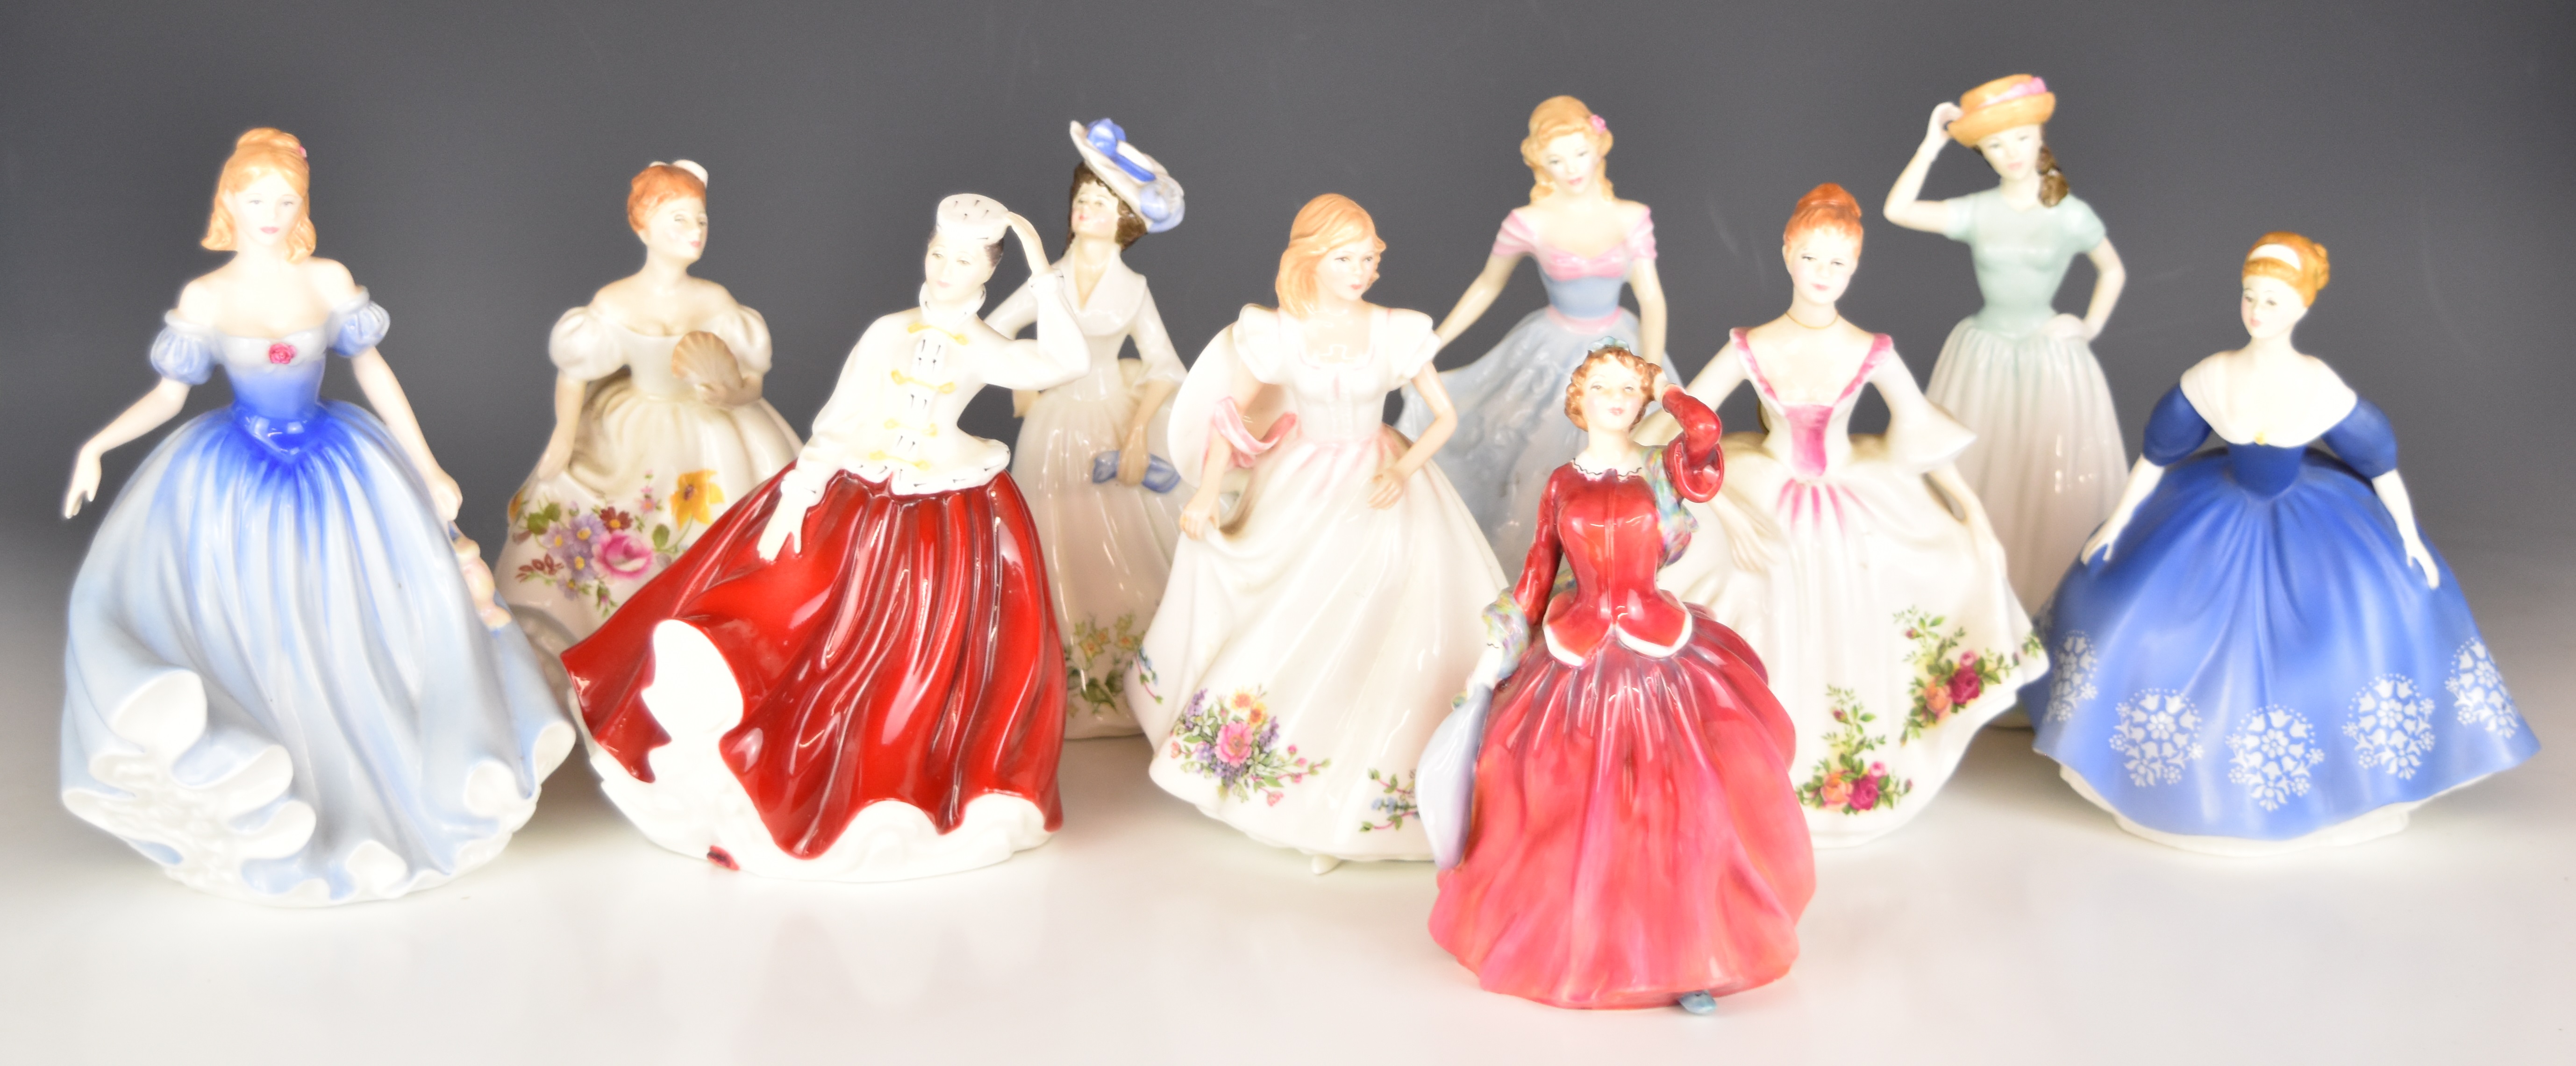 Ten Royal Doulton figurines including Country Rose, Marilyn, Adele, Faith etc, tallest 25cm - Image 8 of 14